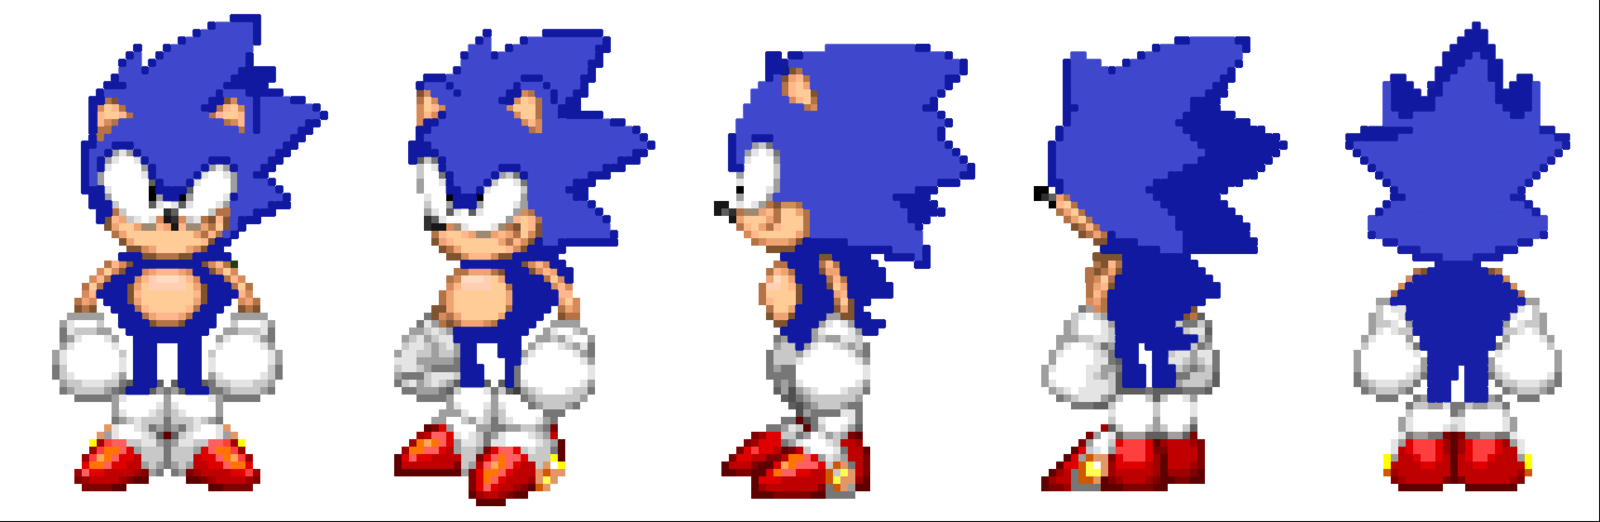 sonic2.93png.png